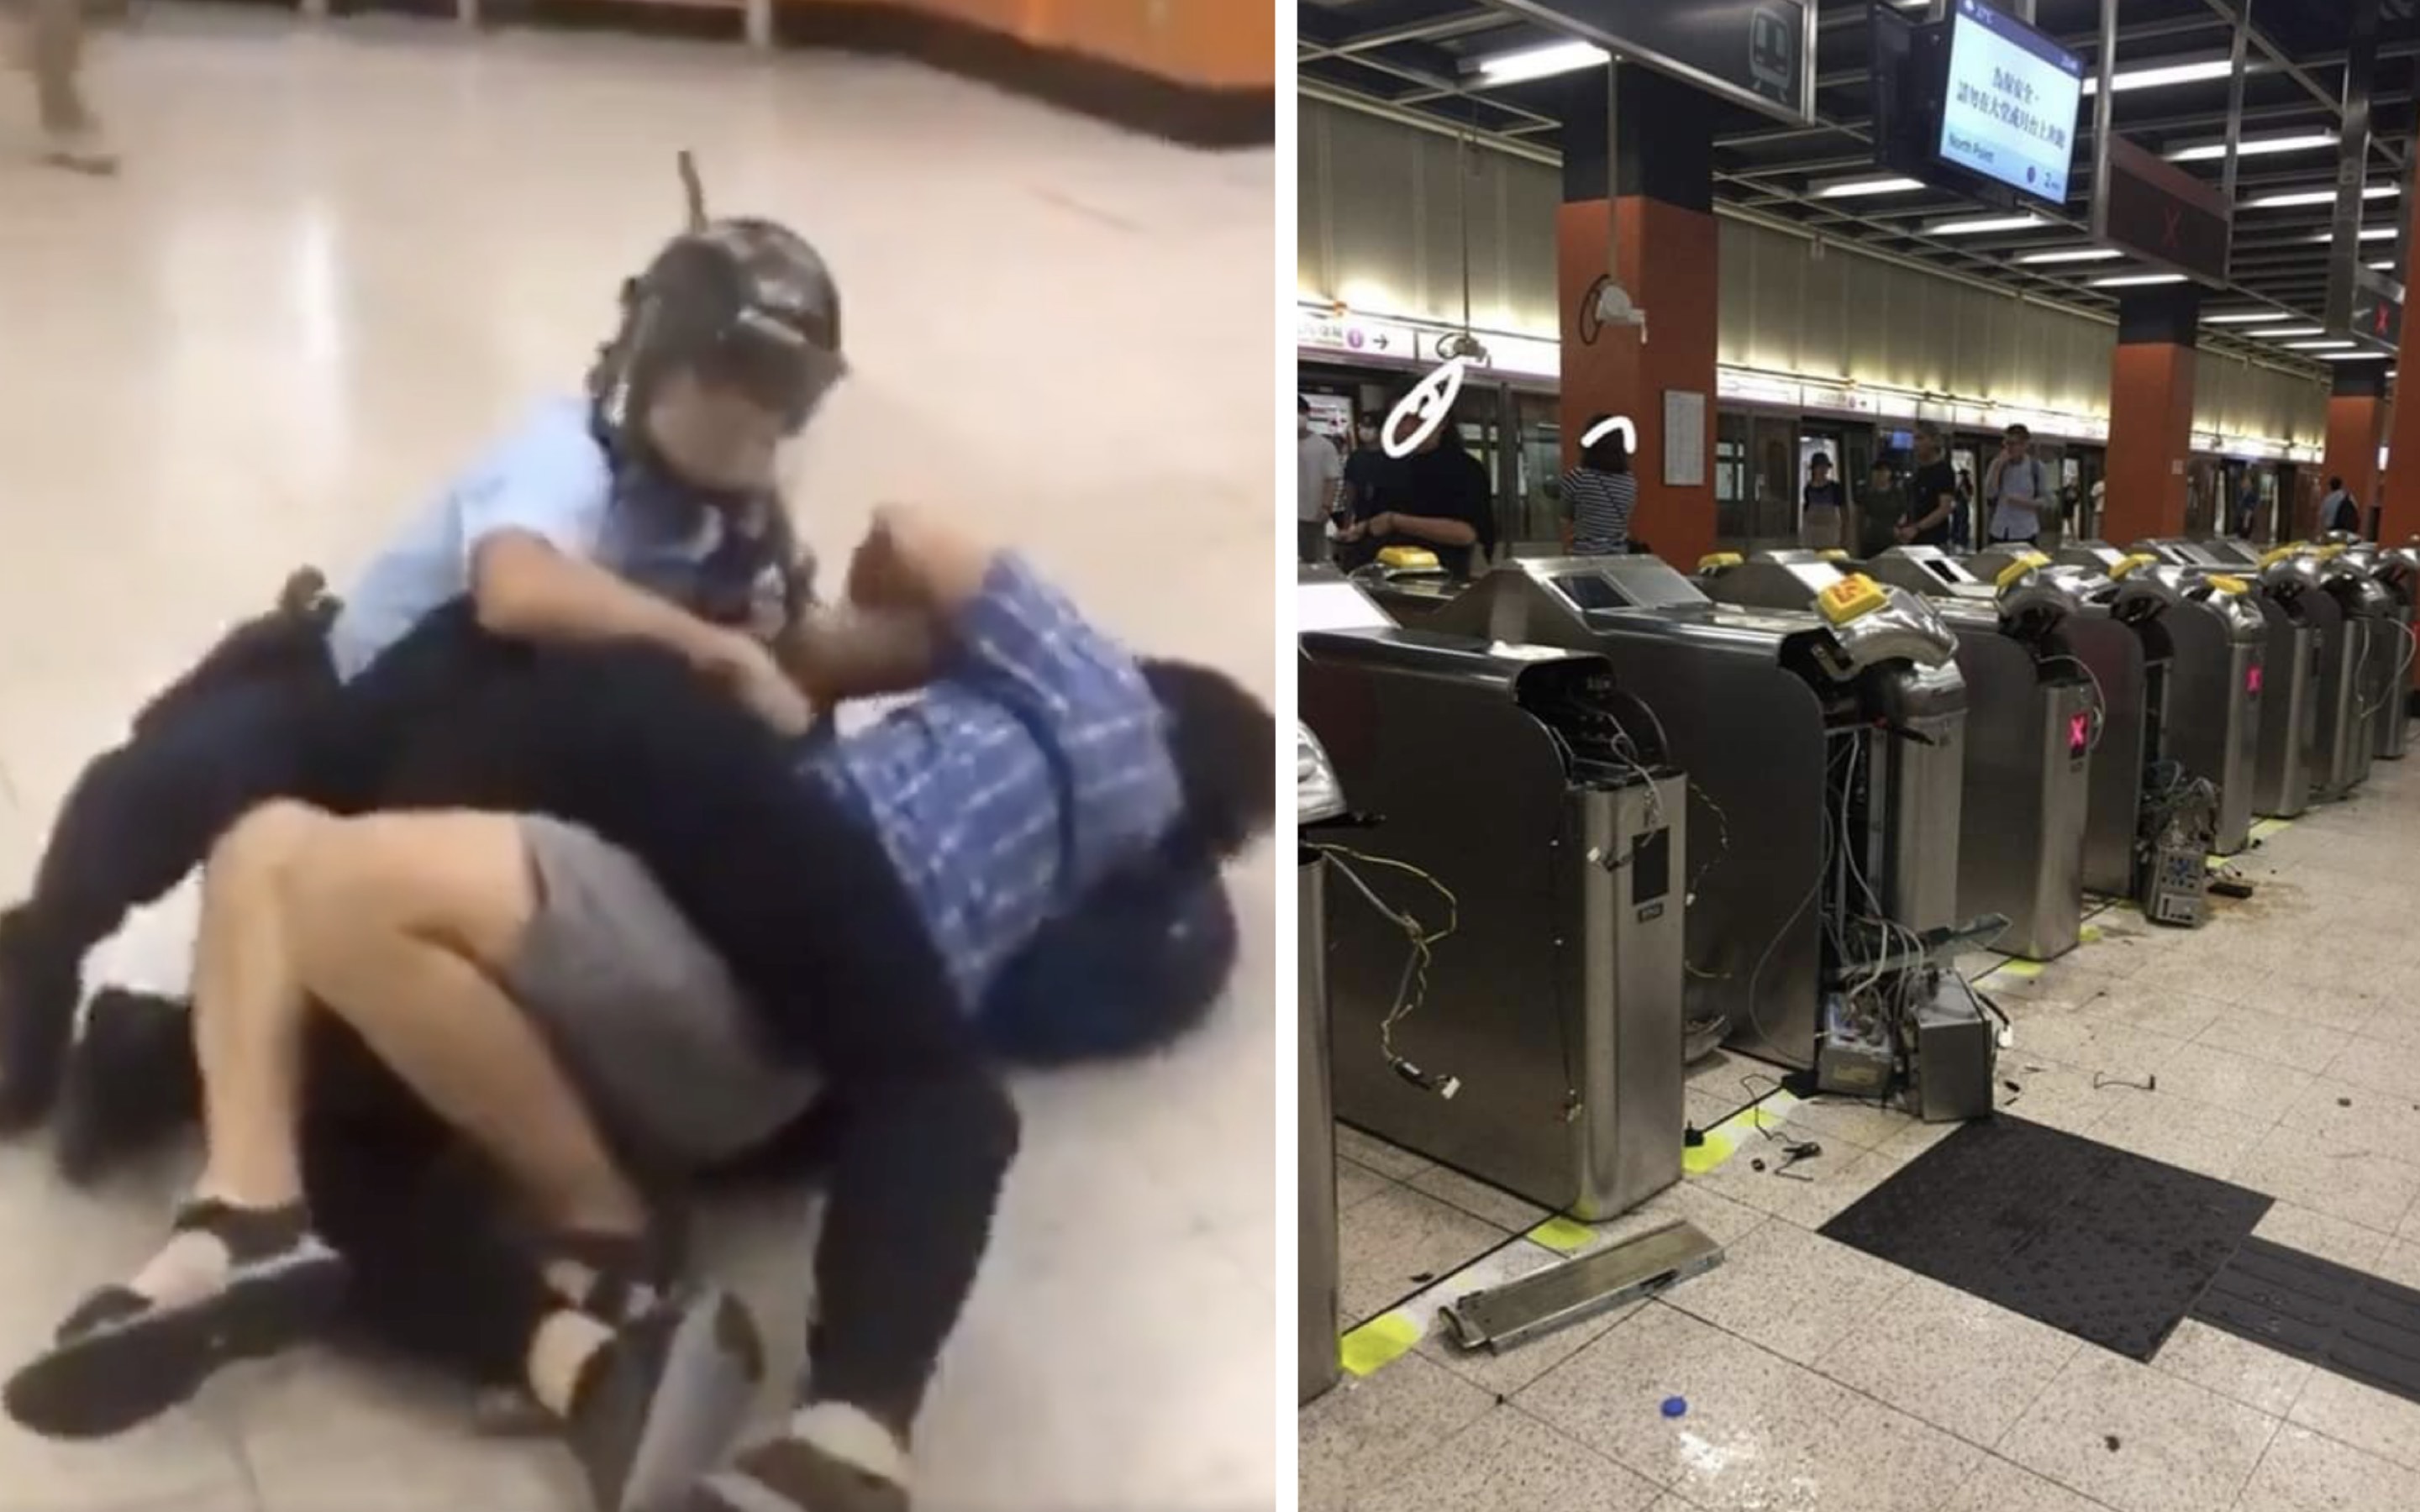 (Left) Police officer subdues two protesters at Po Lam MTR station (right) damaged ticket turnstiles at Po Lam. Screengrab and photos via Twitter and Facebook/梁效輝.